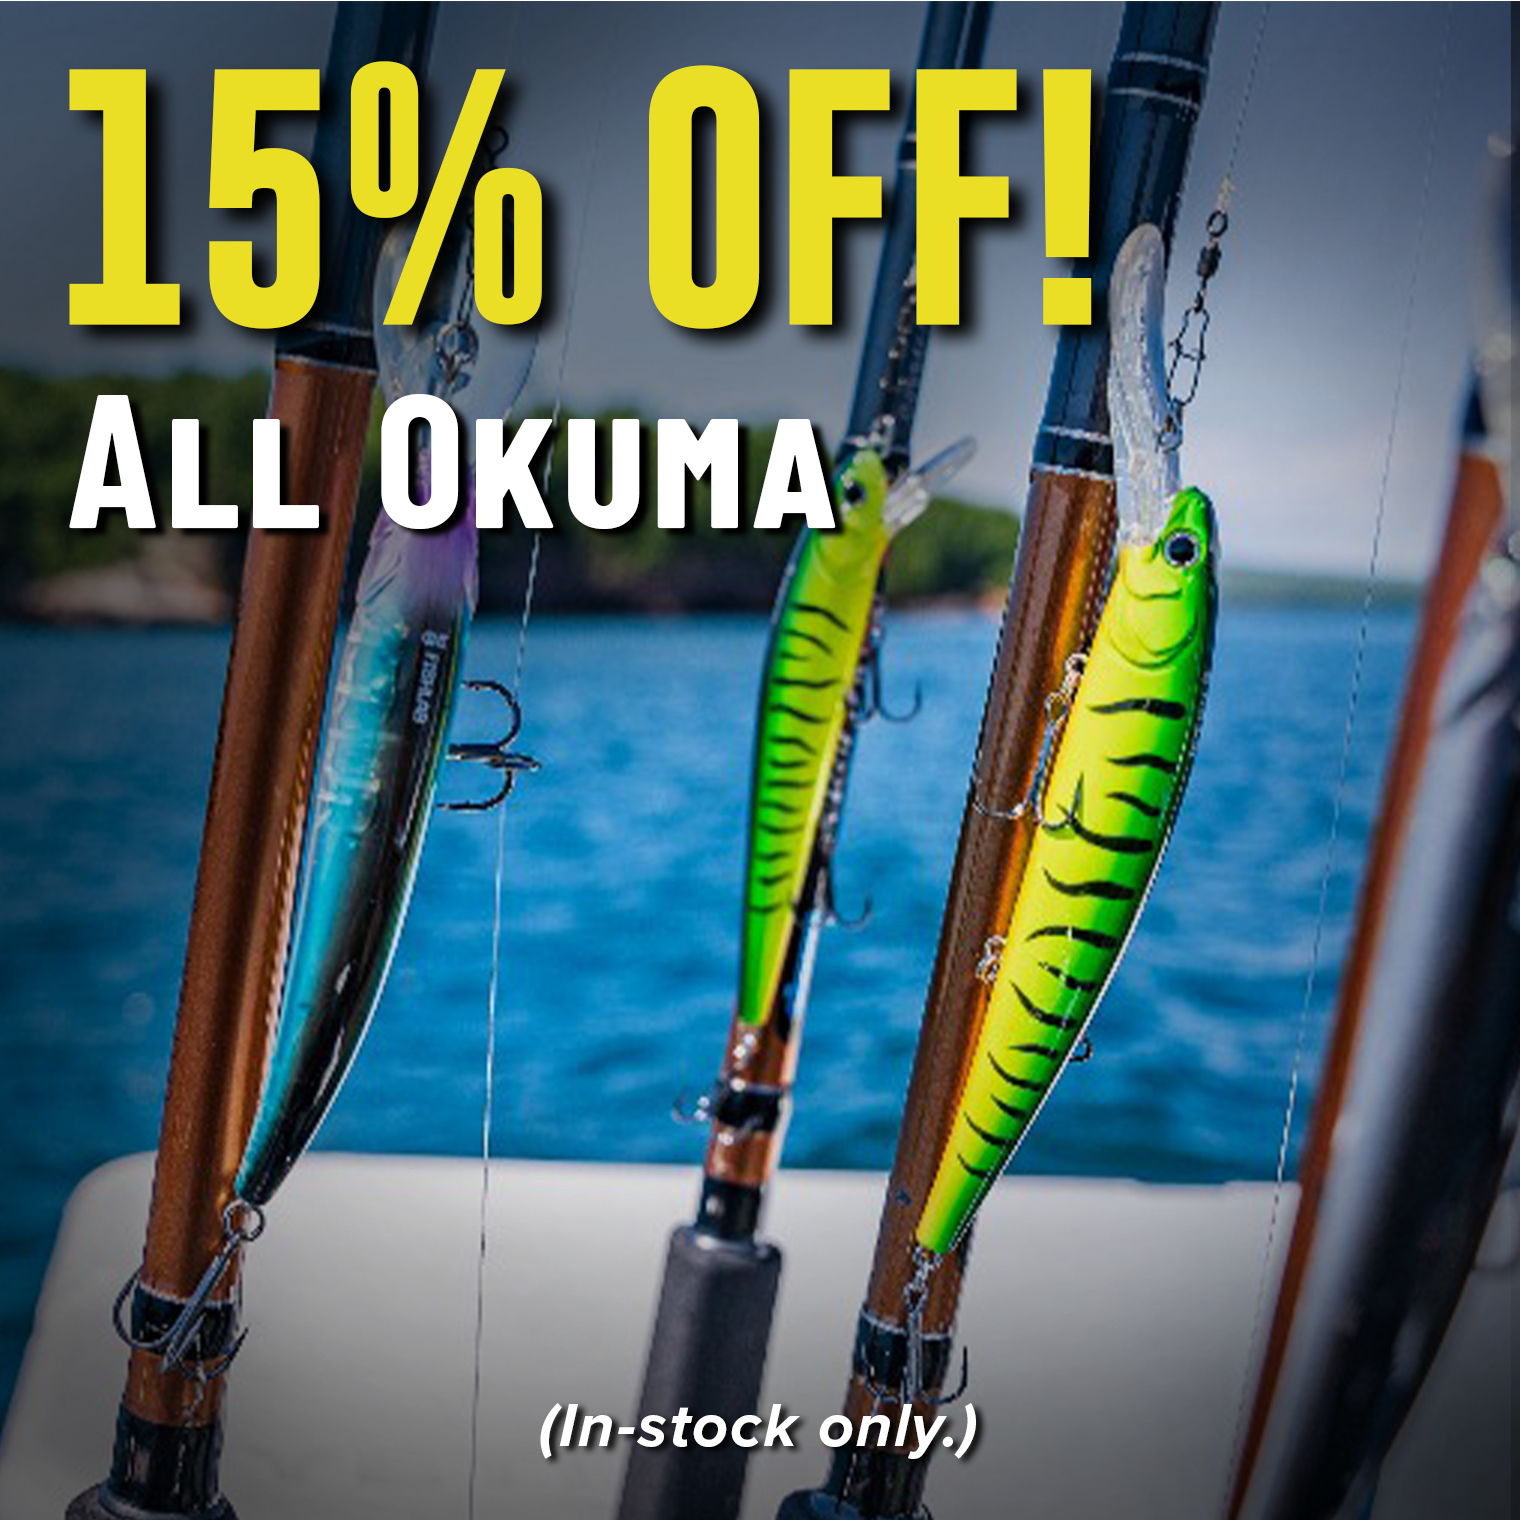 15% Off! All Okuma (In-stock only.)